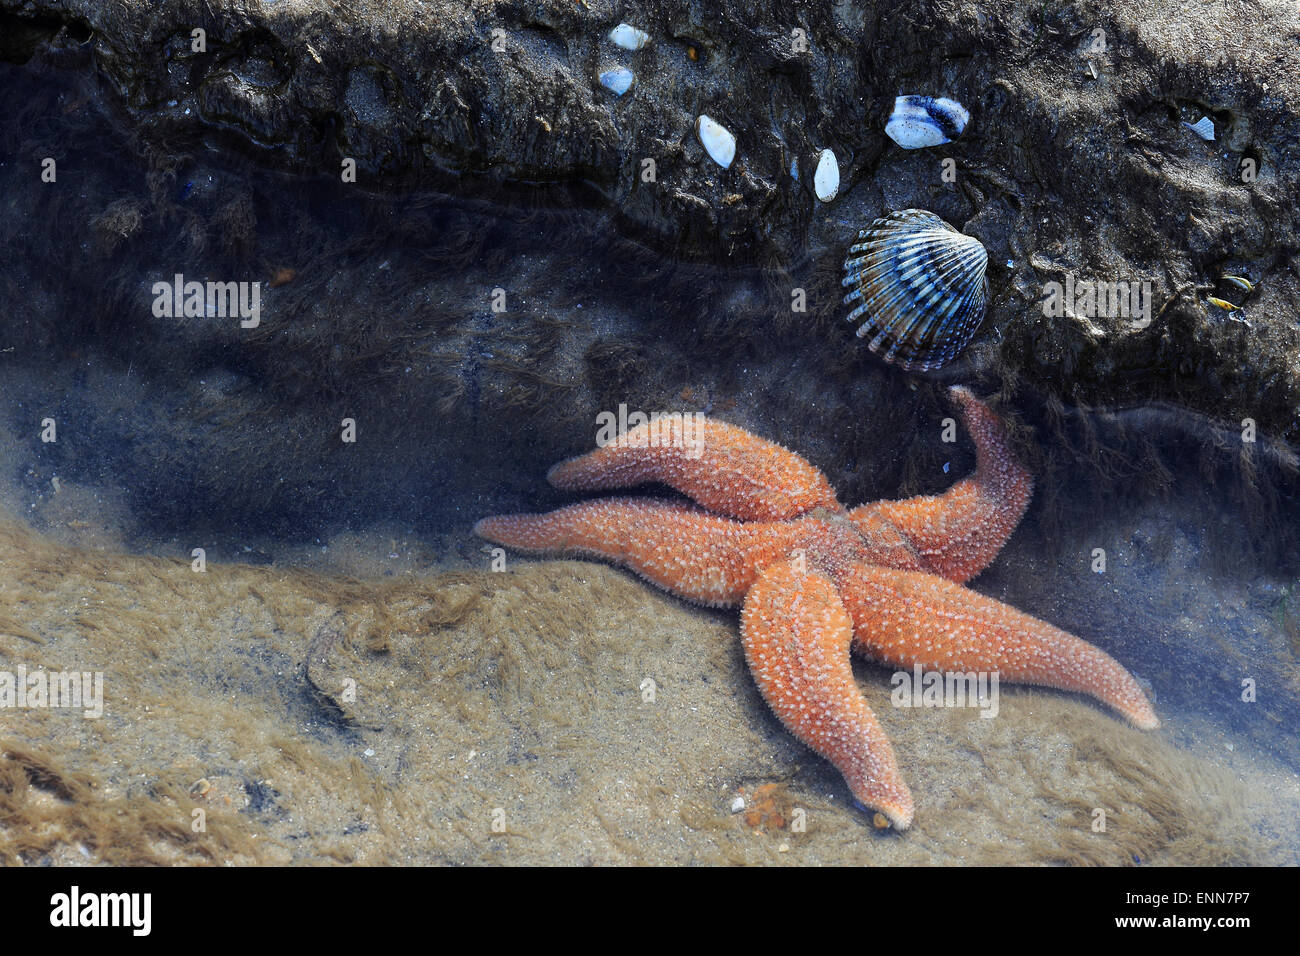 Starfish in the shallow water, Sussex, England Stock Photo